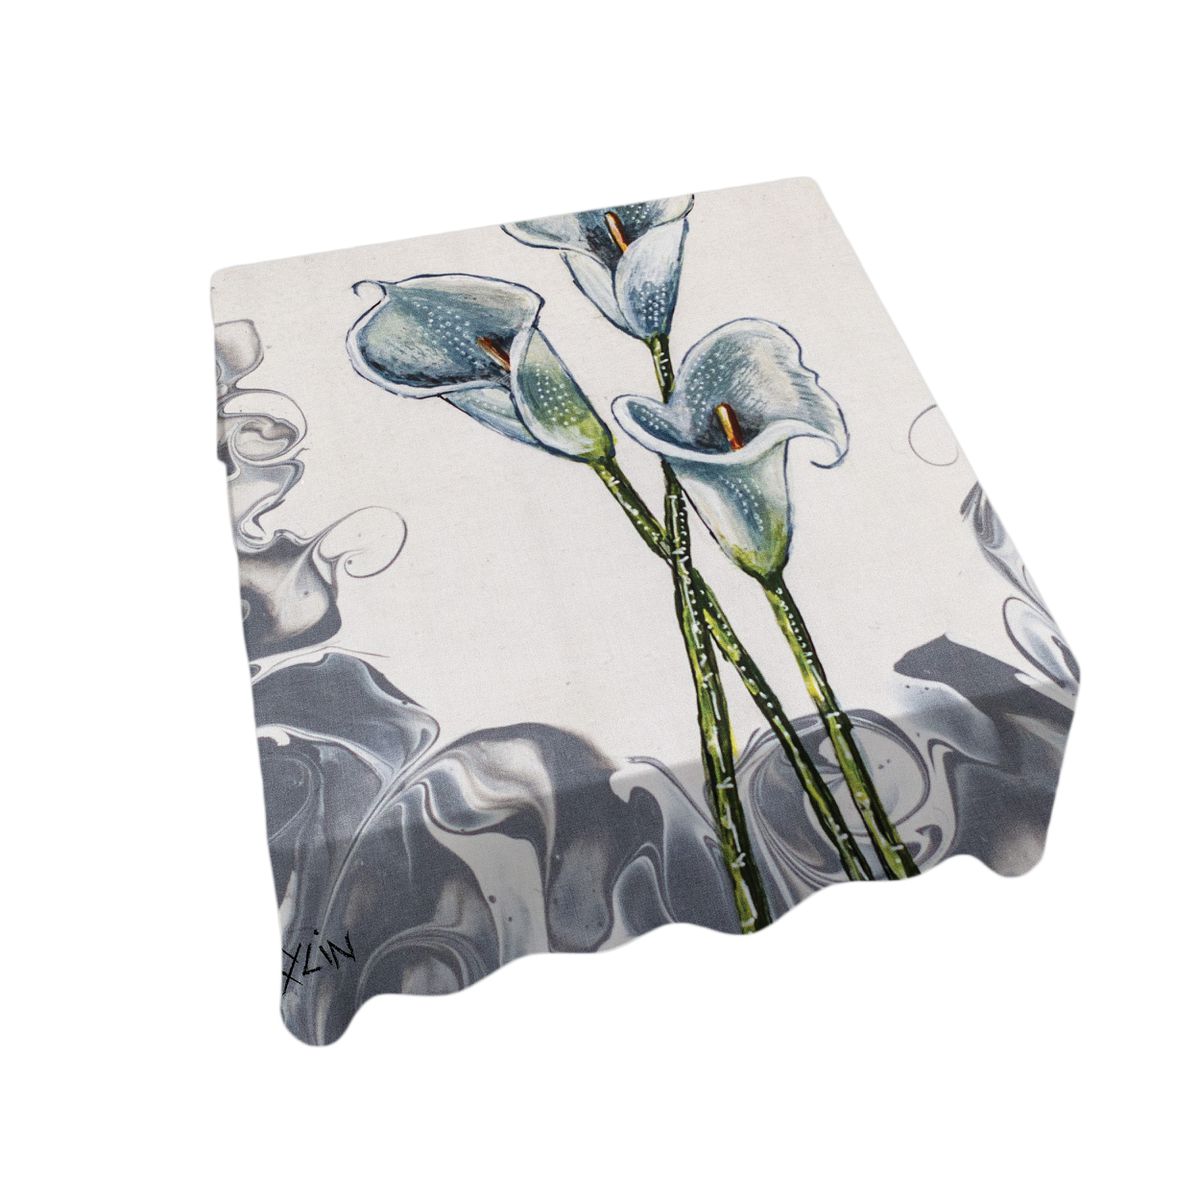 Arum Lily By Cherylin Louw Square Tablecloth